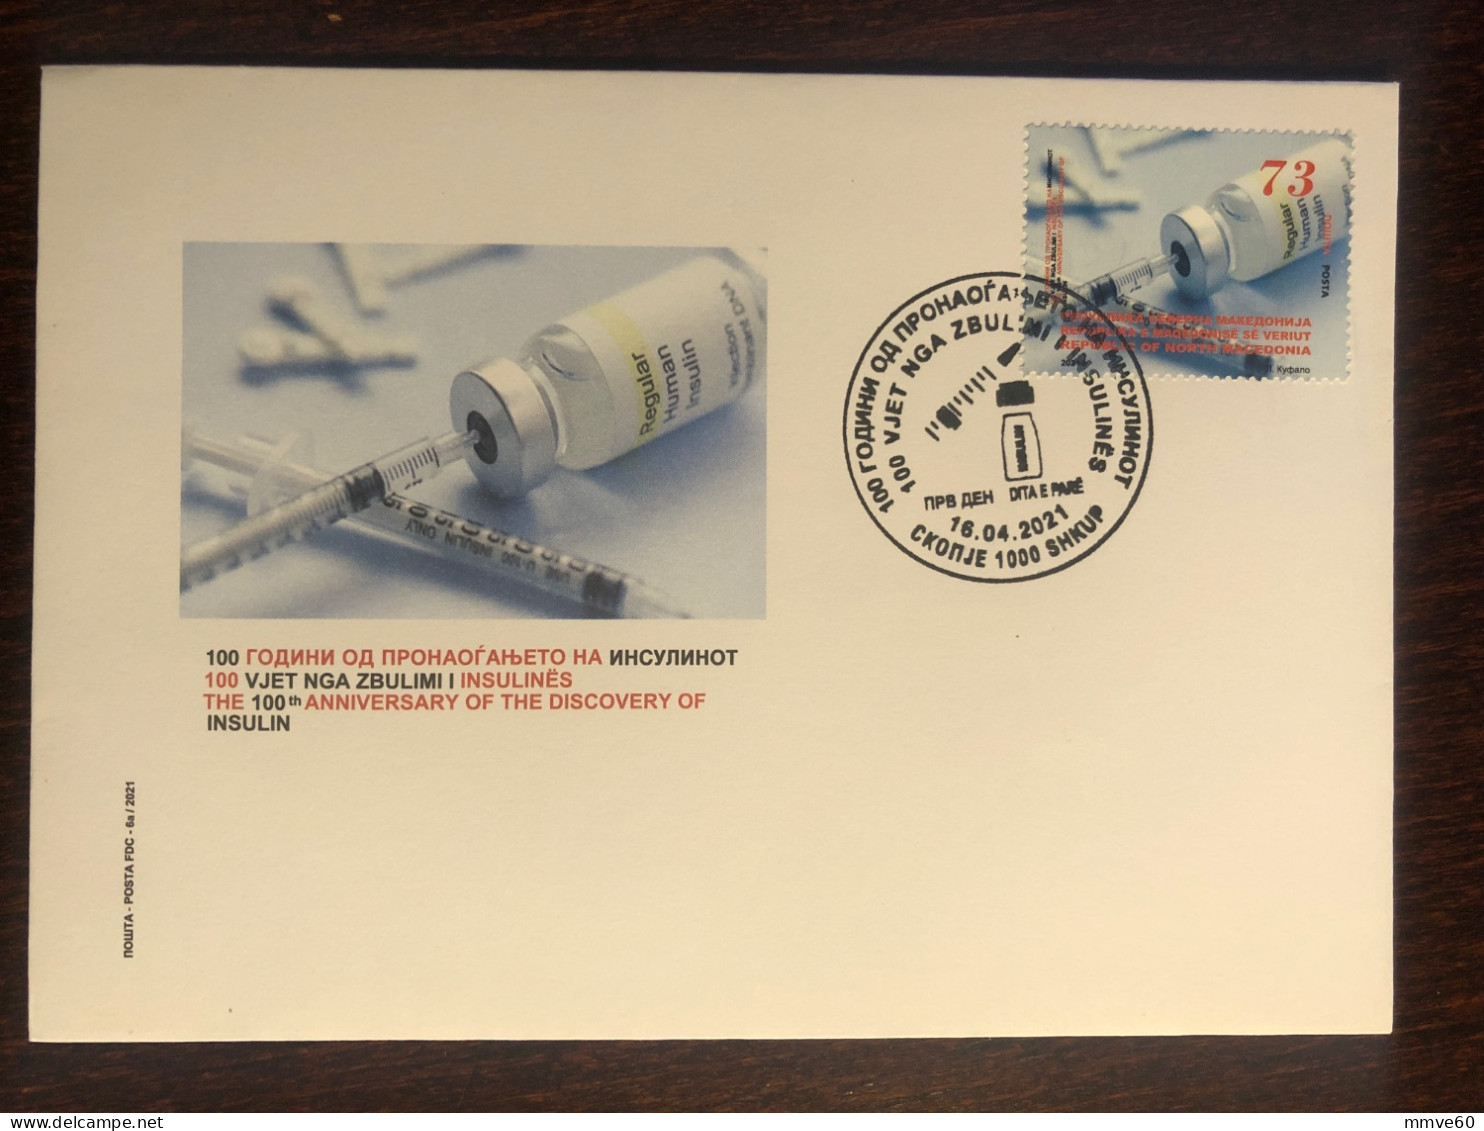 MACEDONIA FDC COVER 2021 YEAR DIABETES INSULIN HEALTH MEDICINE STAMPS - Macedonia Del Nord